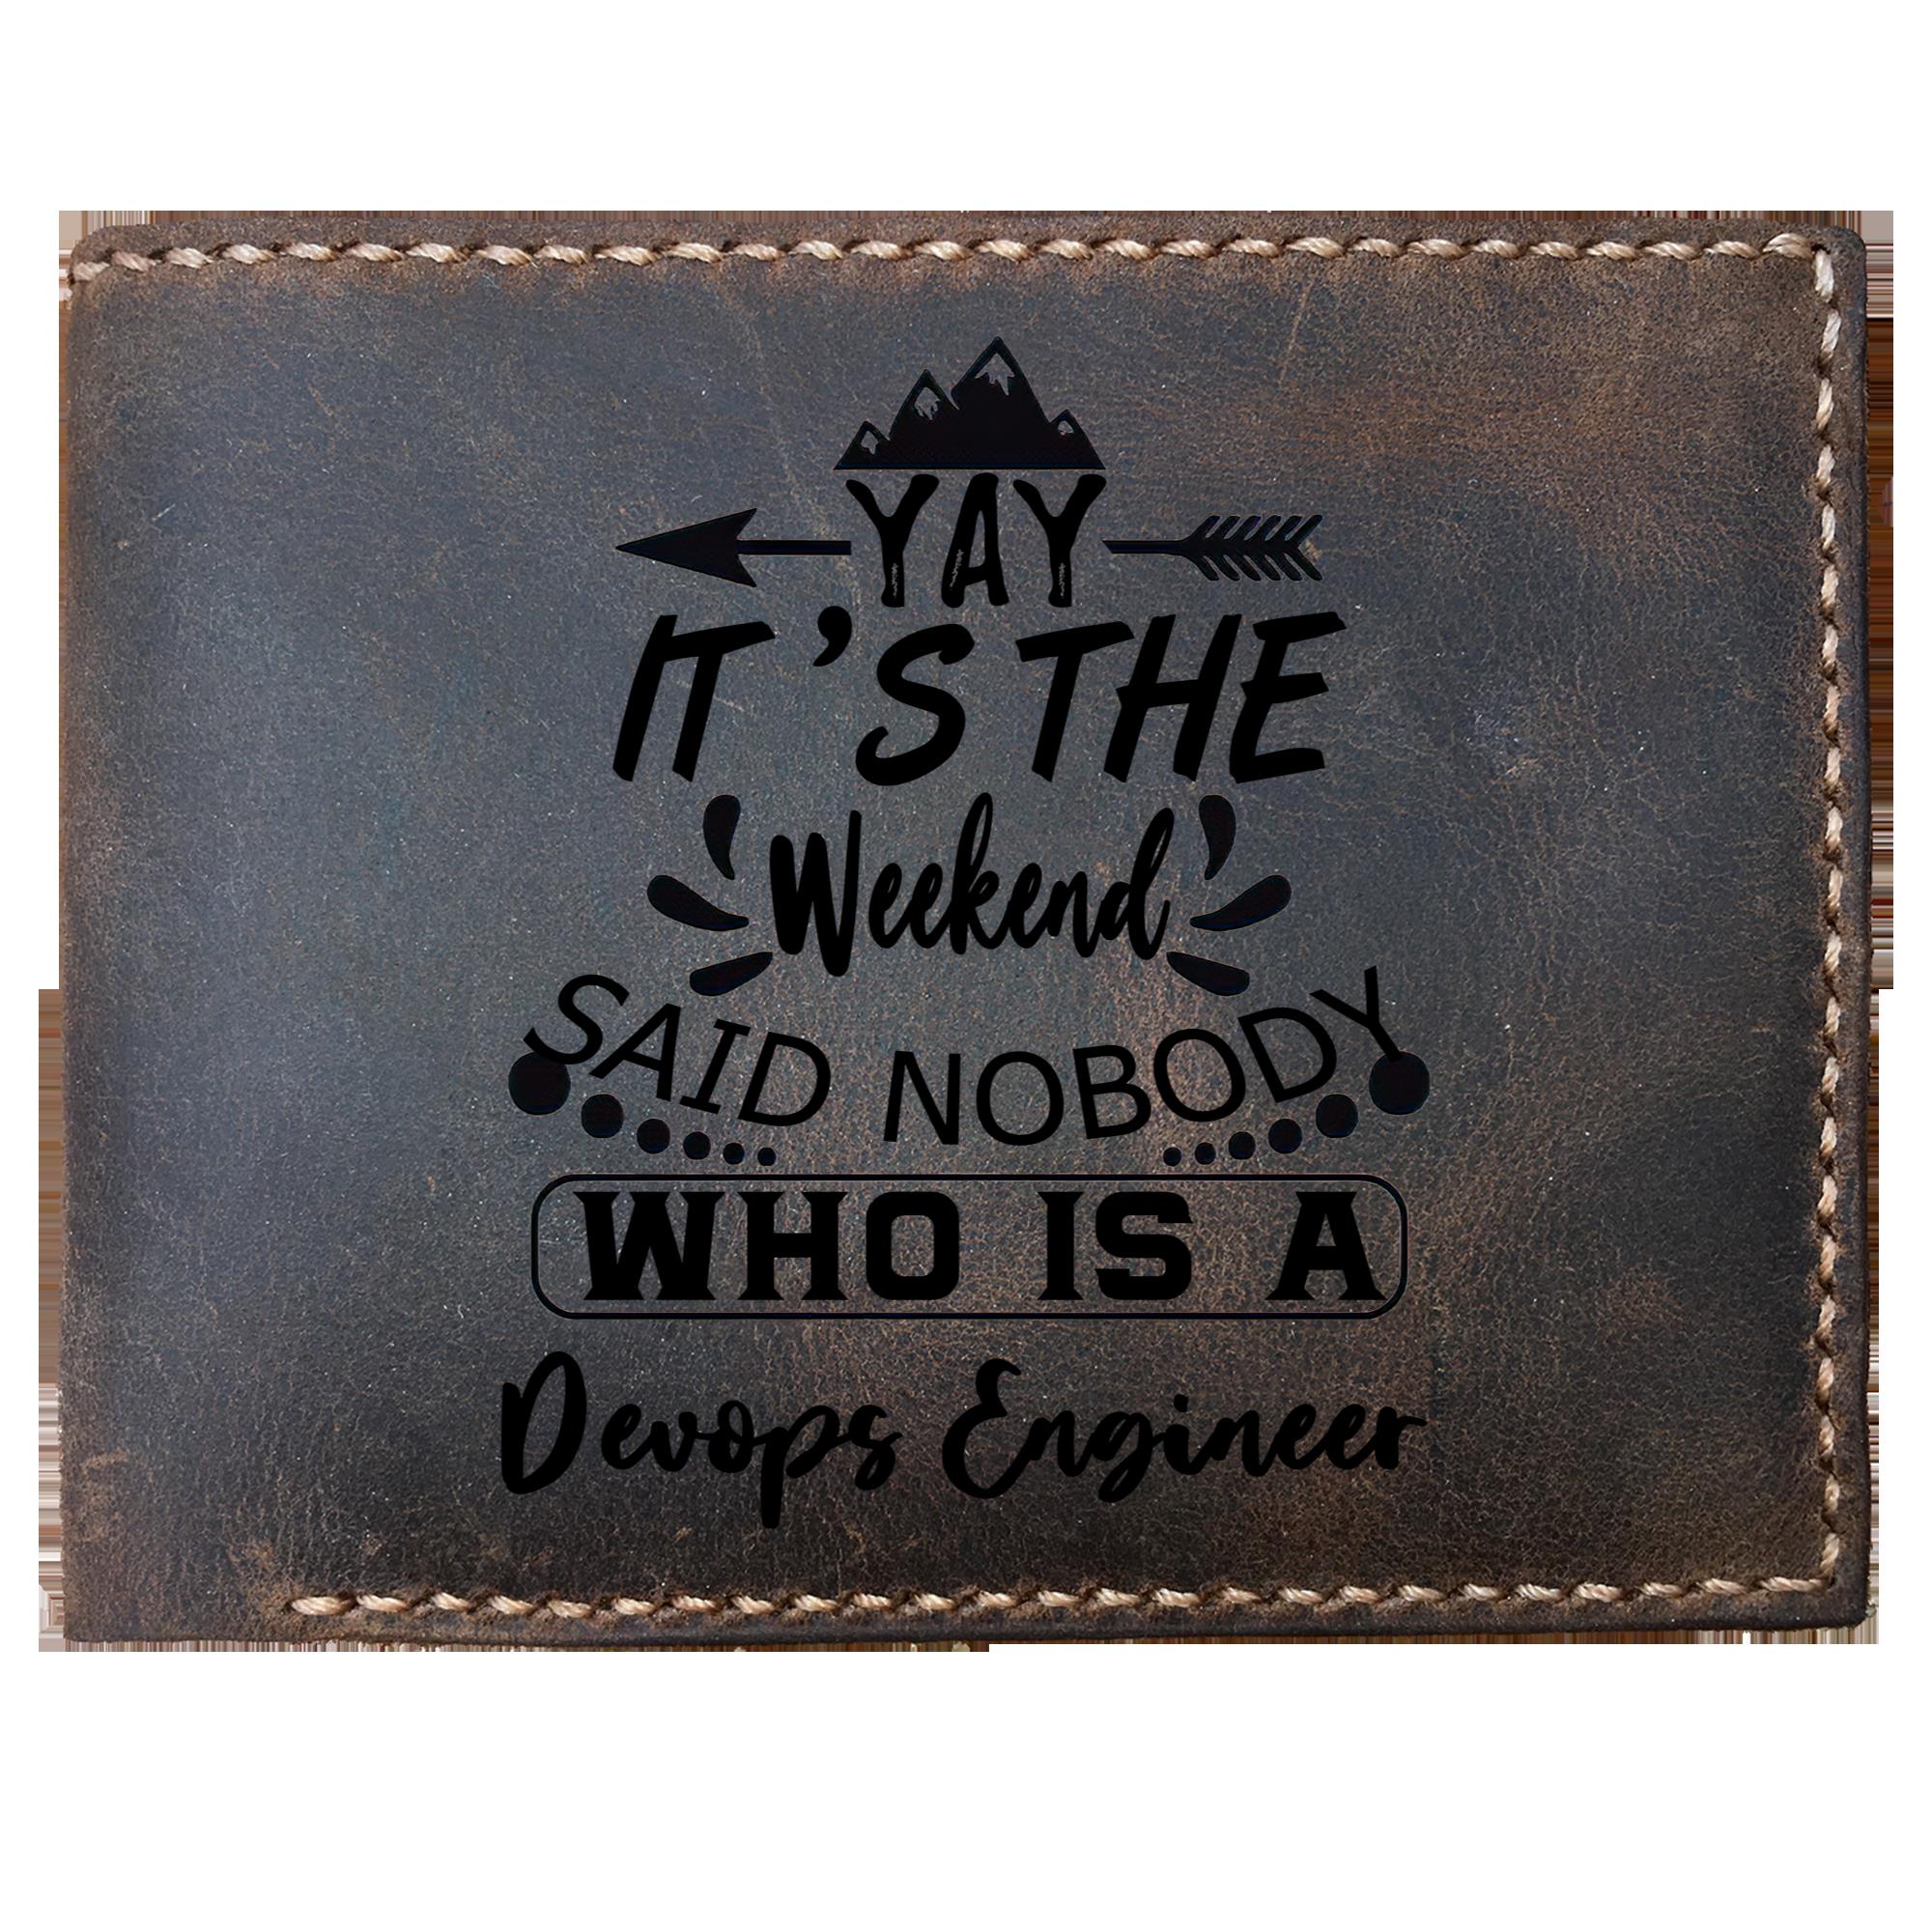 Skitongifts Funny Custom Laser Engraved Bifold Leather Wallet For Men, It's The Weekend Said Nobody Who Is A Devops Engineer, Father's Day Gifts